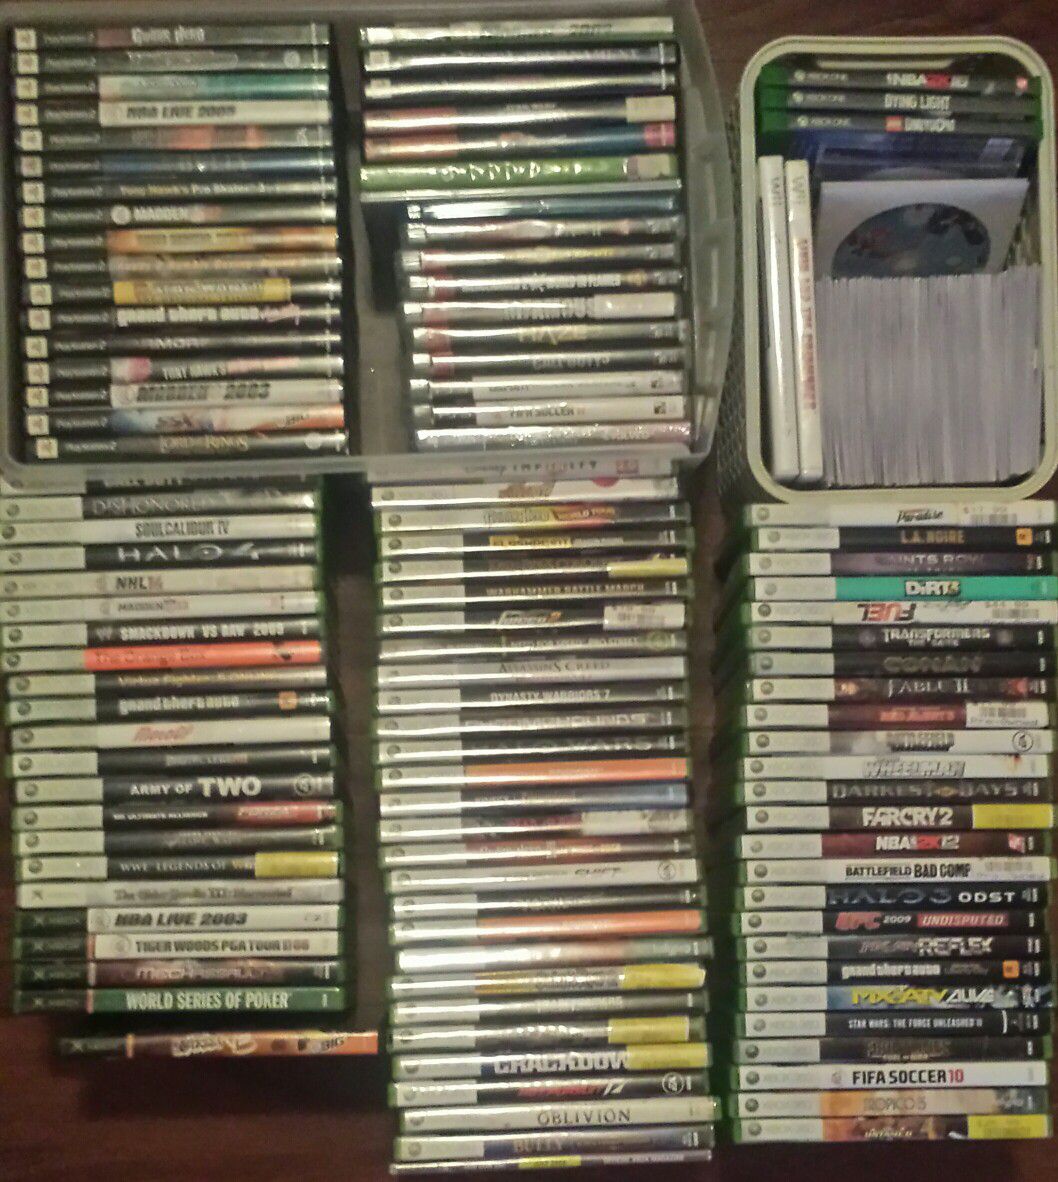 Huge Lot of Games - Xbox, Xbox 360, Xbox One, PS2, PS3, PS4, Playstation 2 3 4, Nintendo Wii